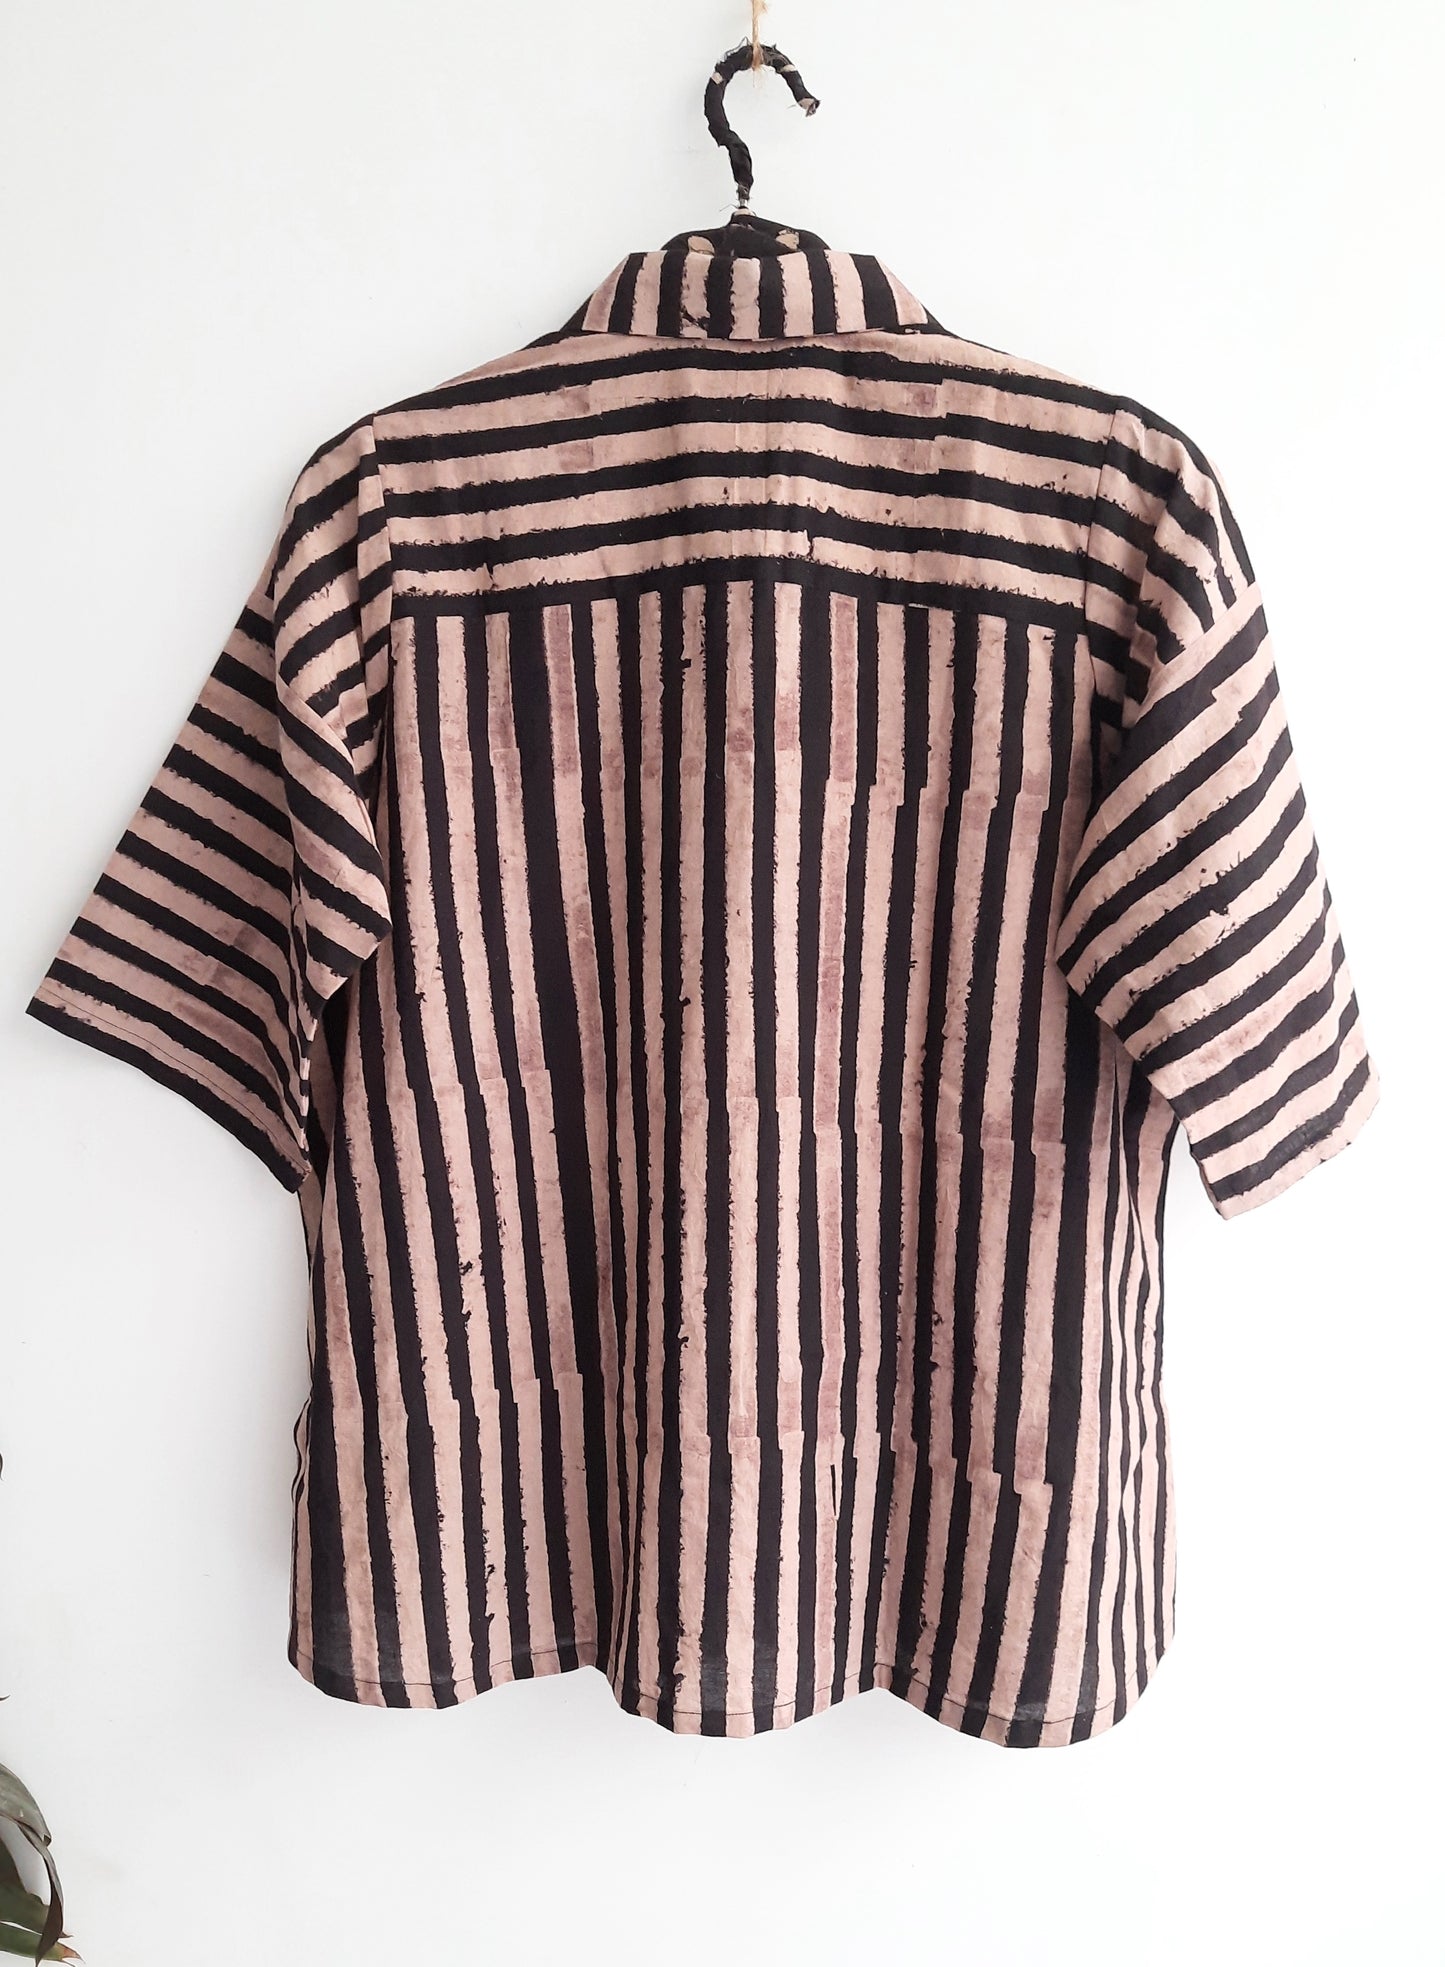 Stripes black and beige shirt for her, Conscious fashion